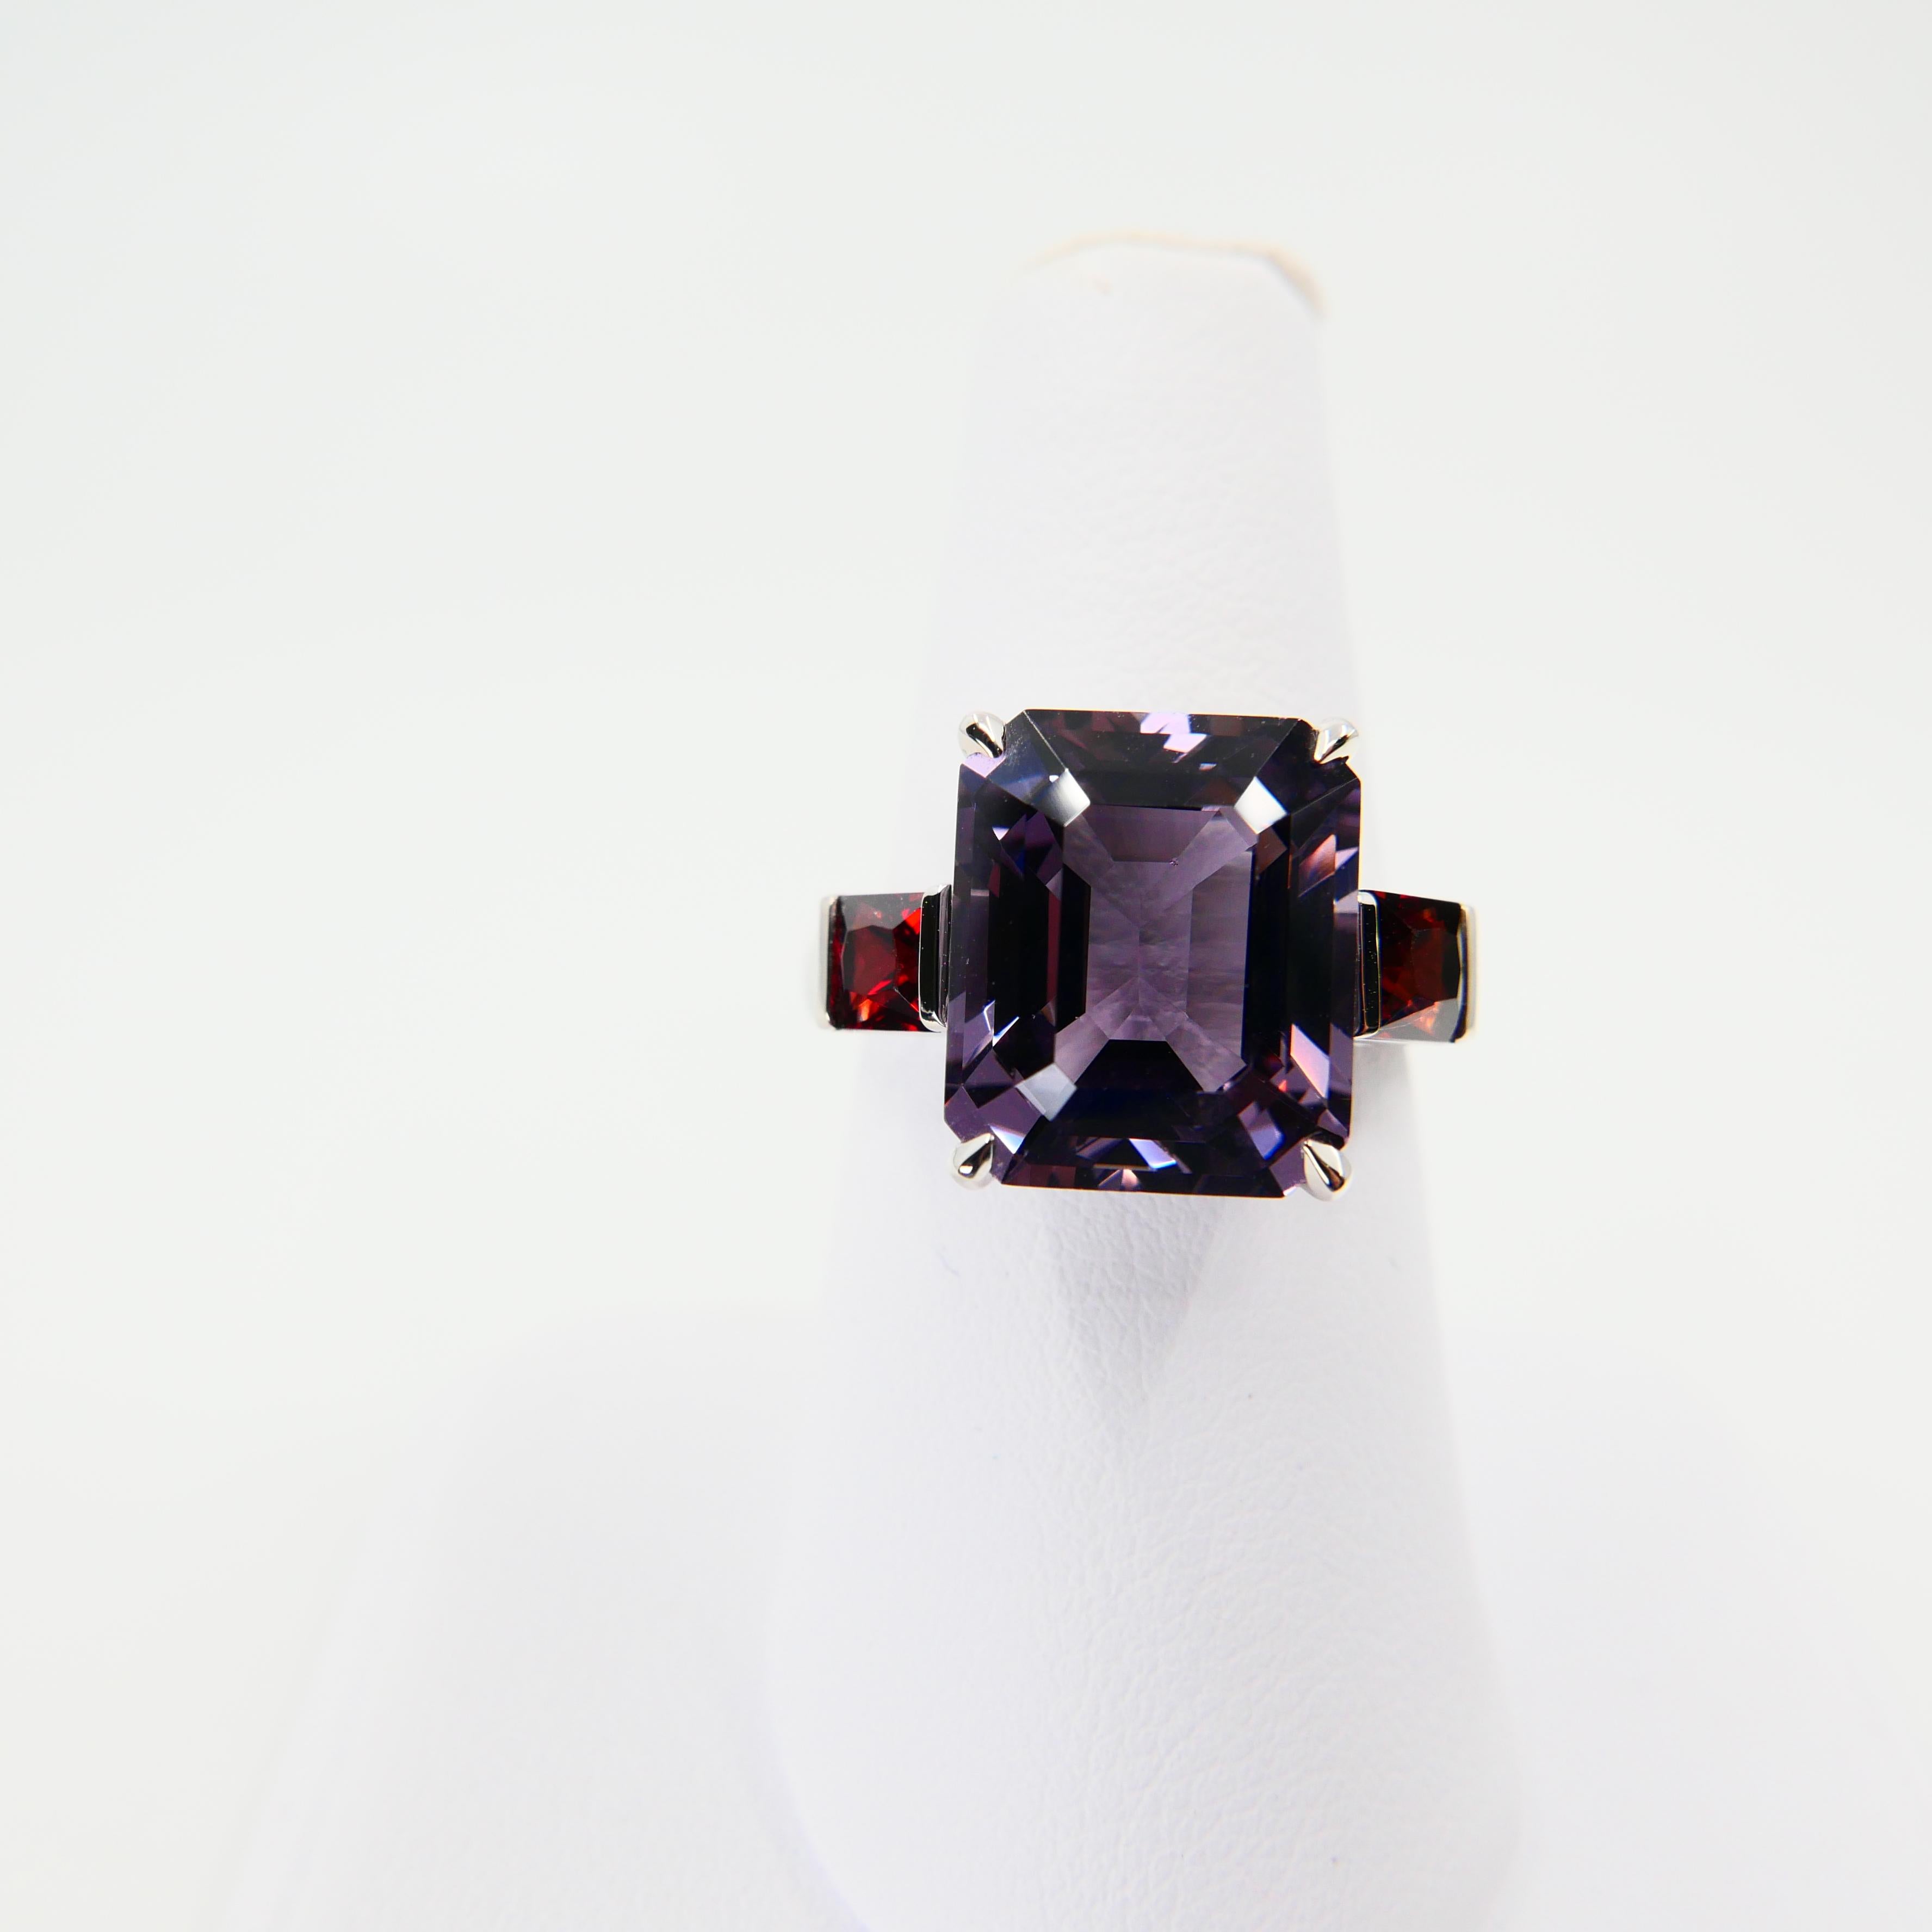 Natural 7.77 Cts Purple Spinel & 0.83 Carat Red Spinel Three-Stone Cocktail Ring 6